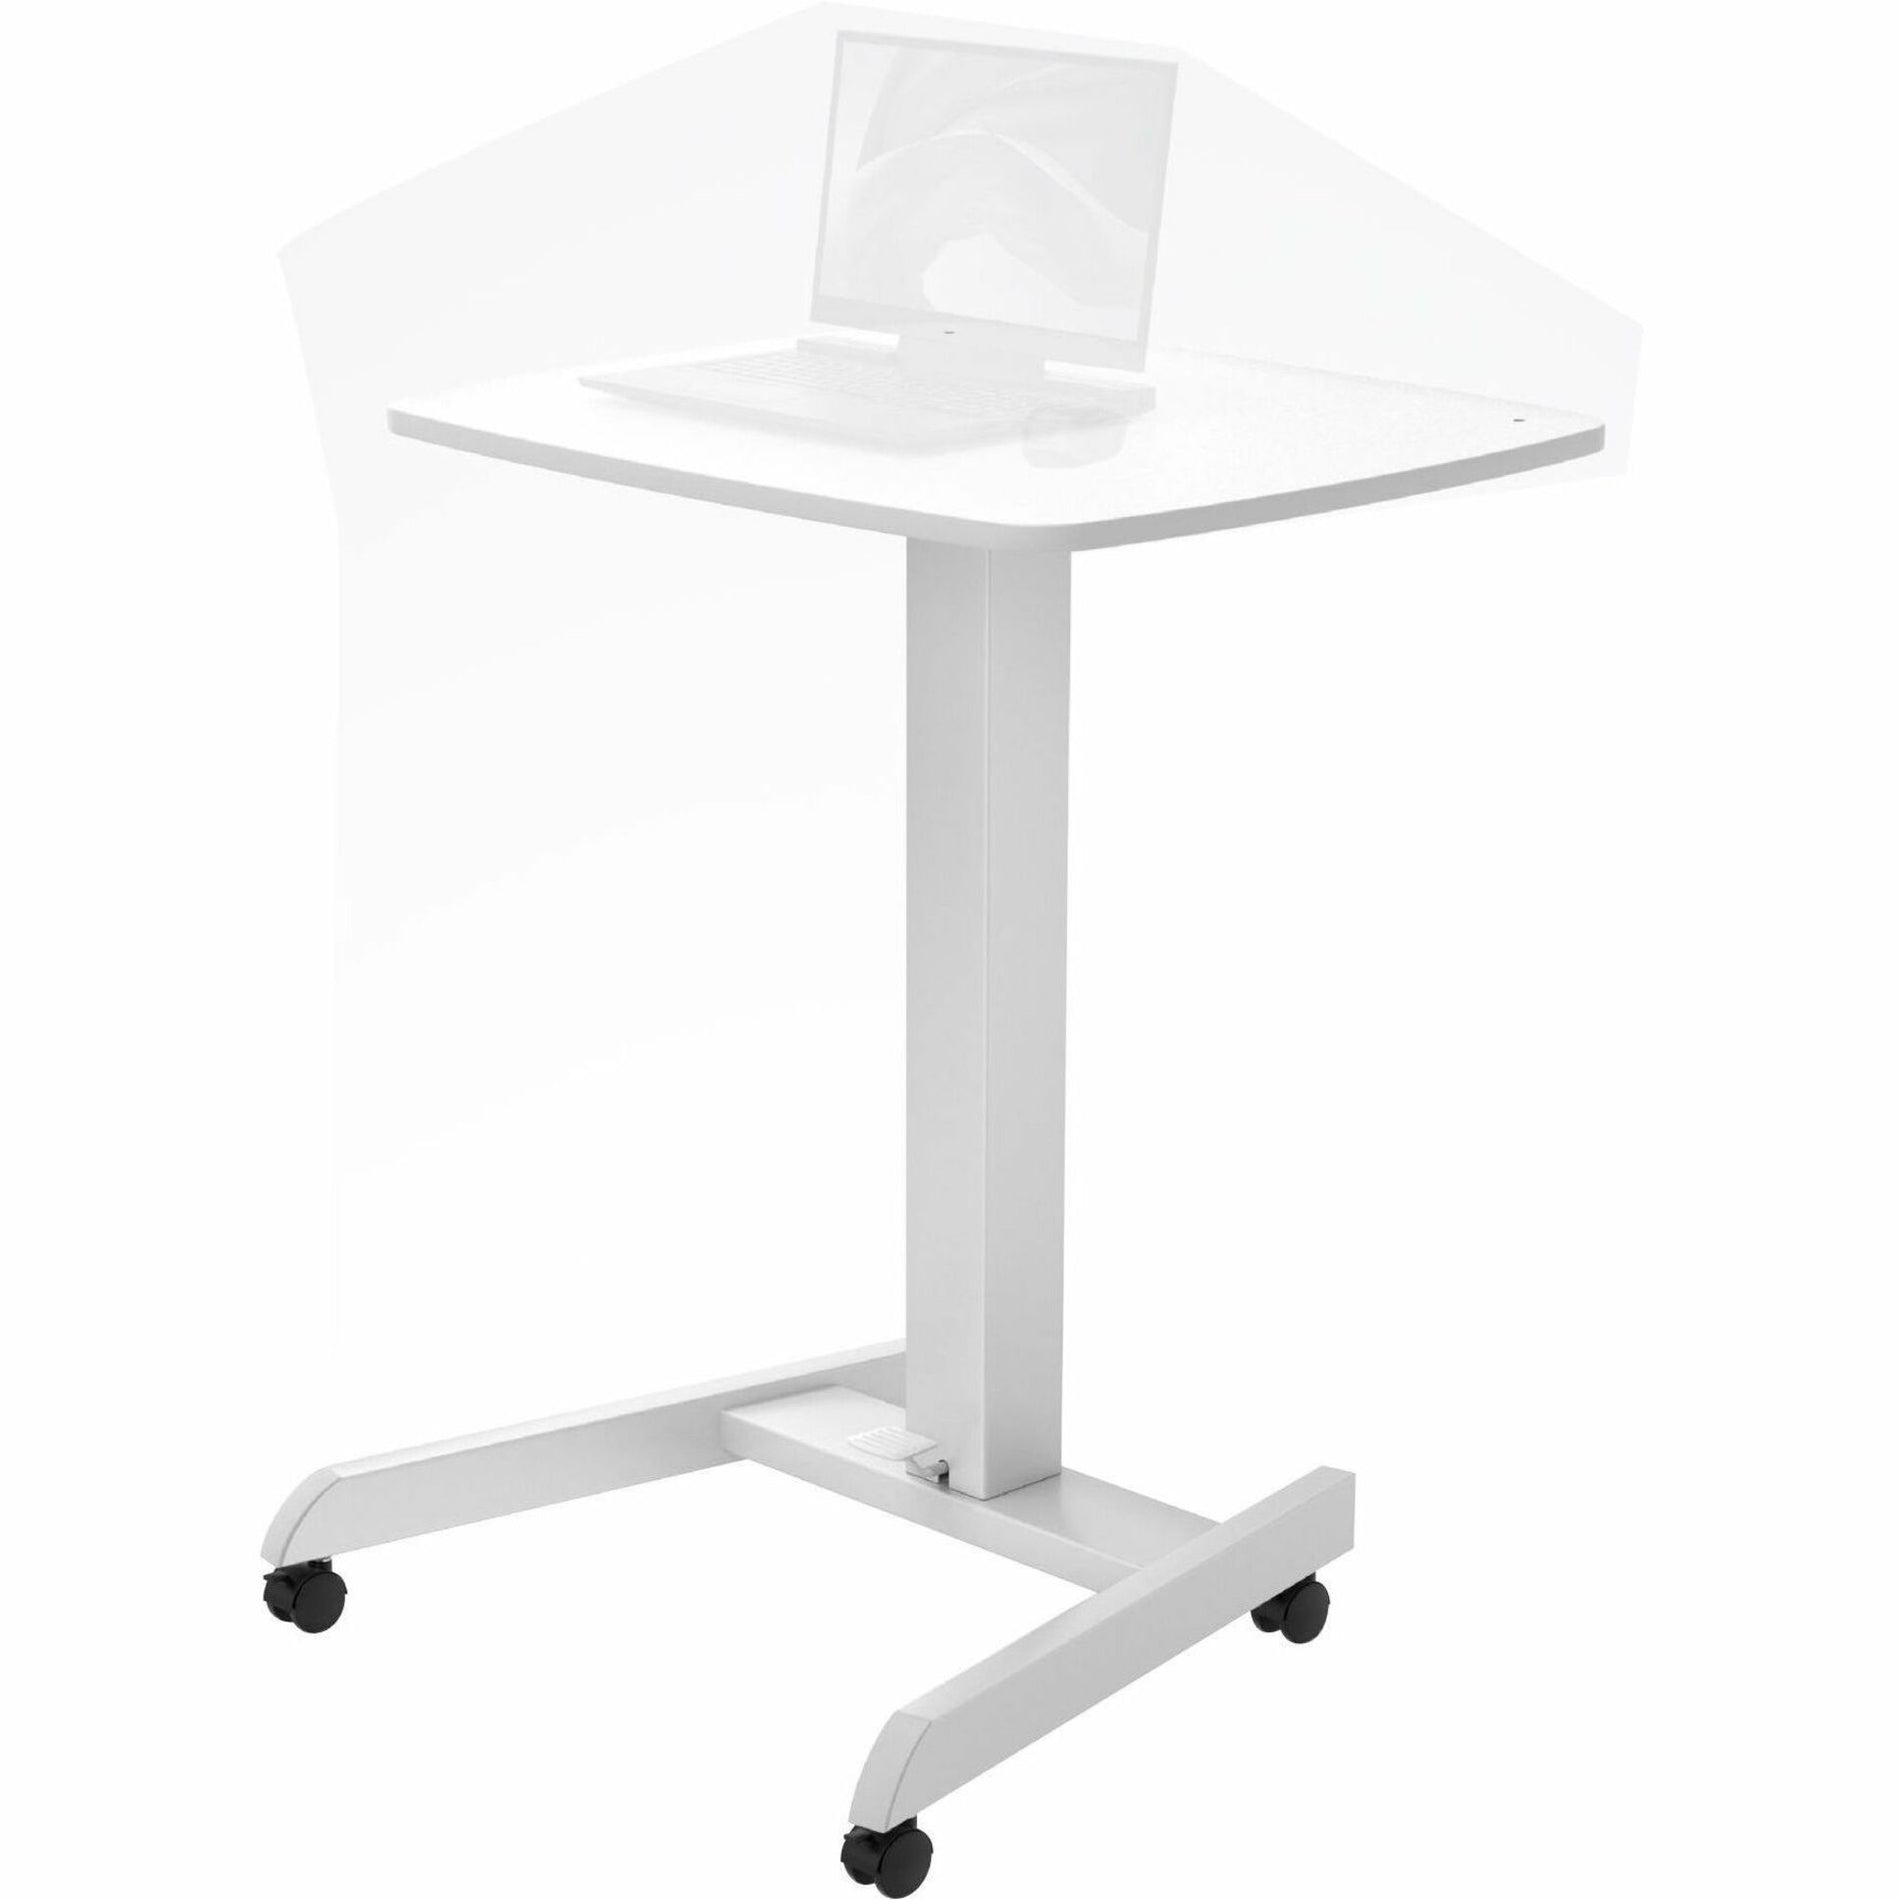 CTA Digital PAD-ARLTD Height-Adjustable Rolling Desk with 2 Grommet VESA Mounts, Compact, Portable, Gas Spring, Adjustable Height, Sturdy, Caster, Locking Casters, Foot Pedal, Articulating Arm, Rotate, Tilt, Cable Management, Smooth, Durable